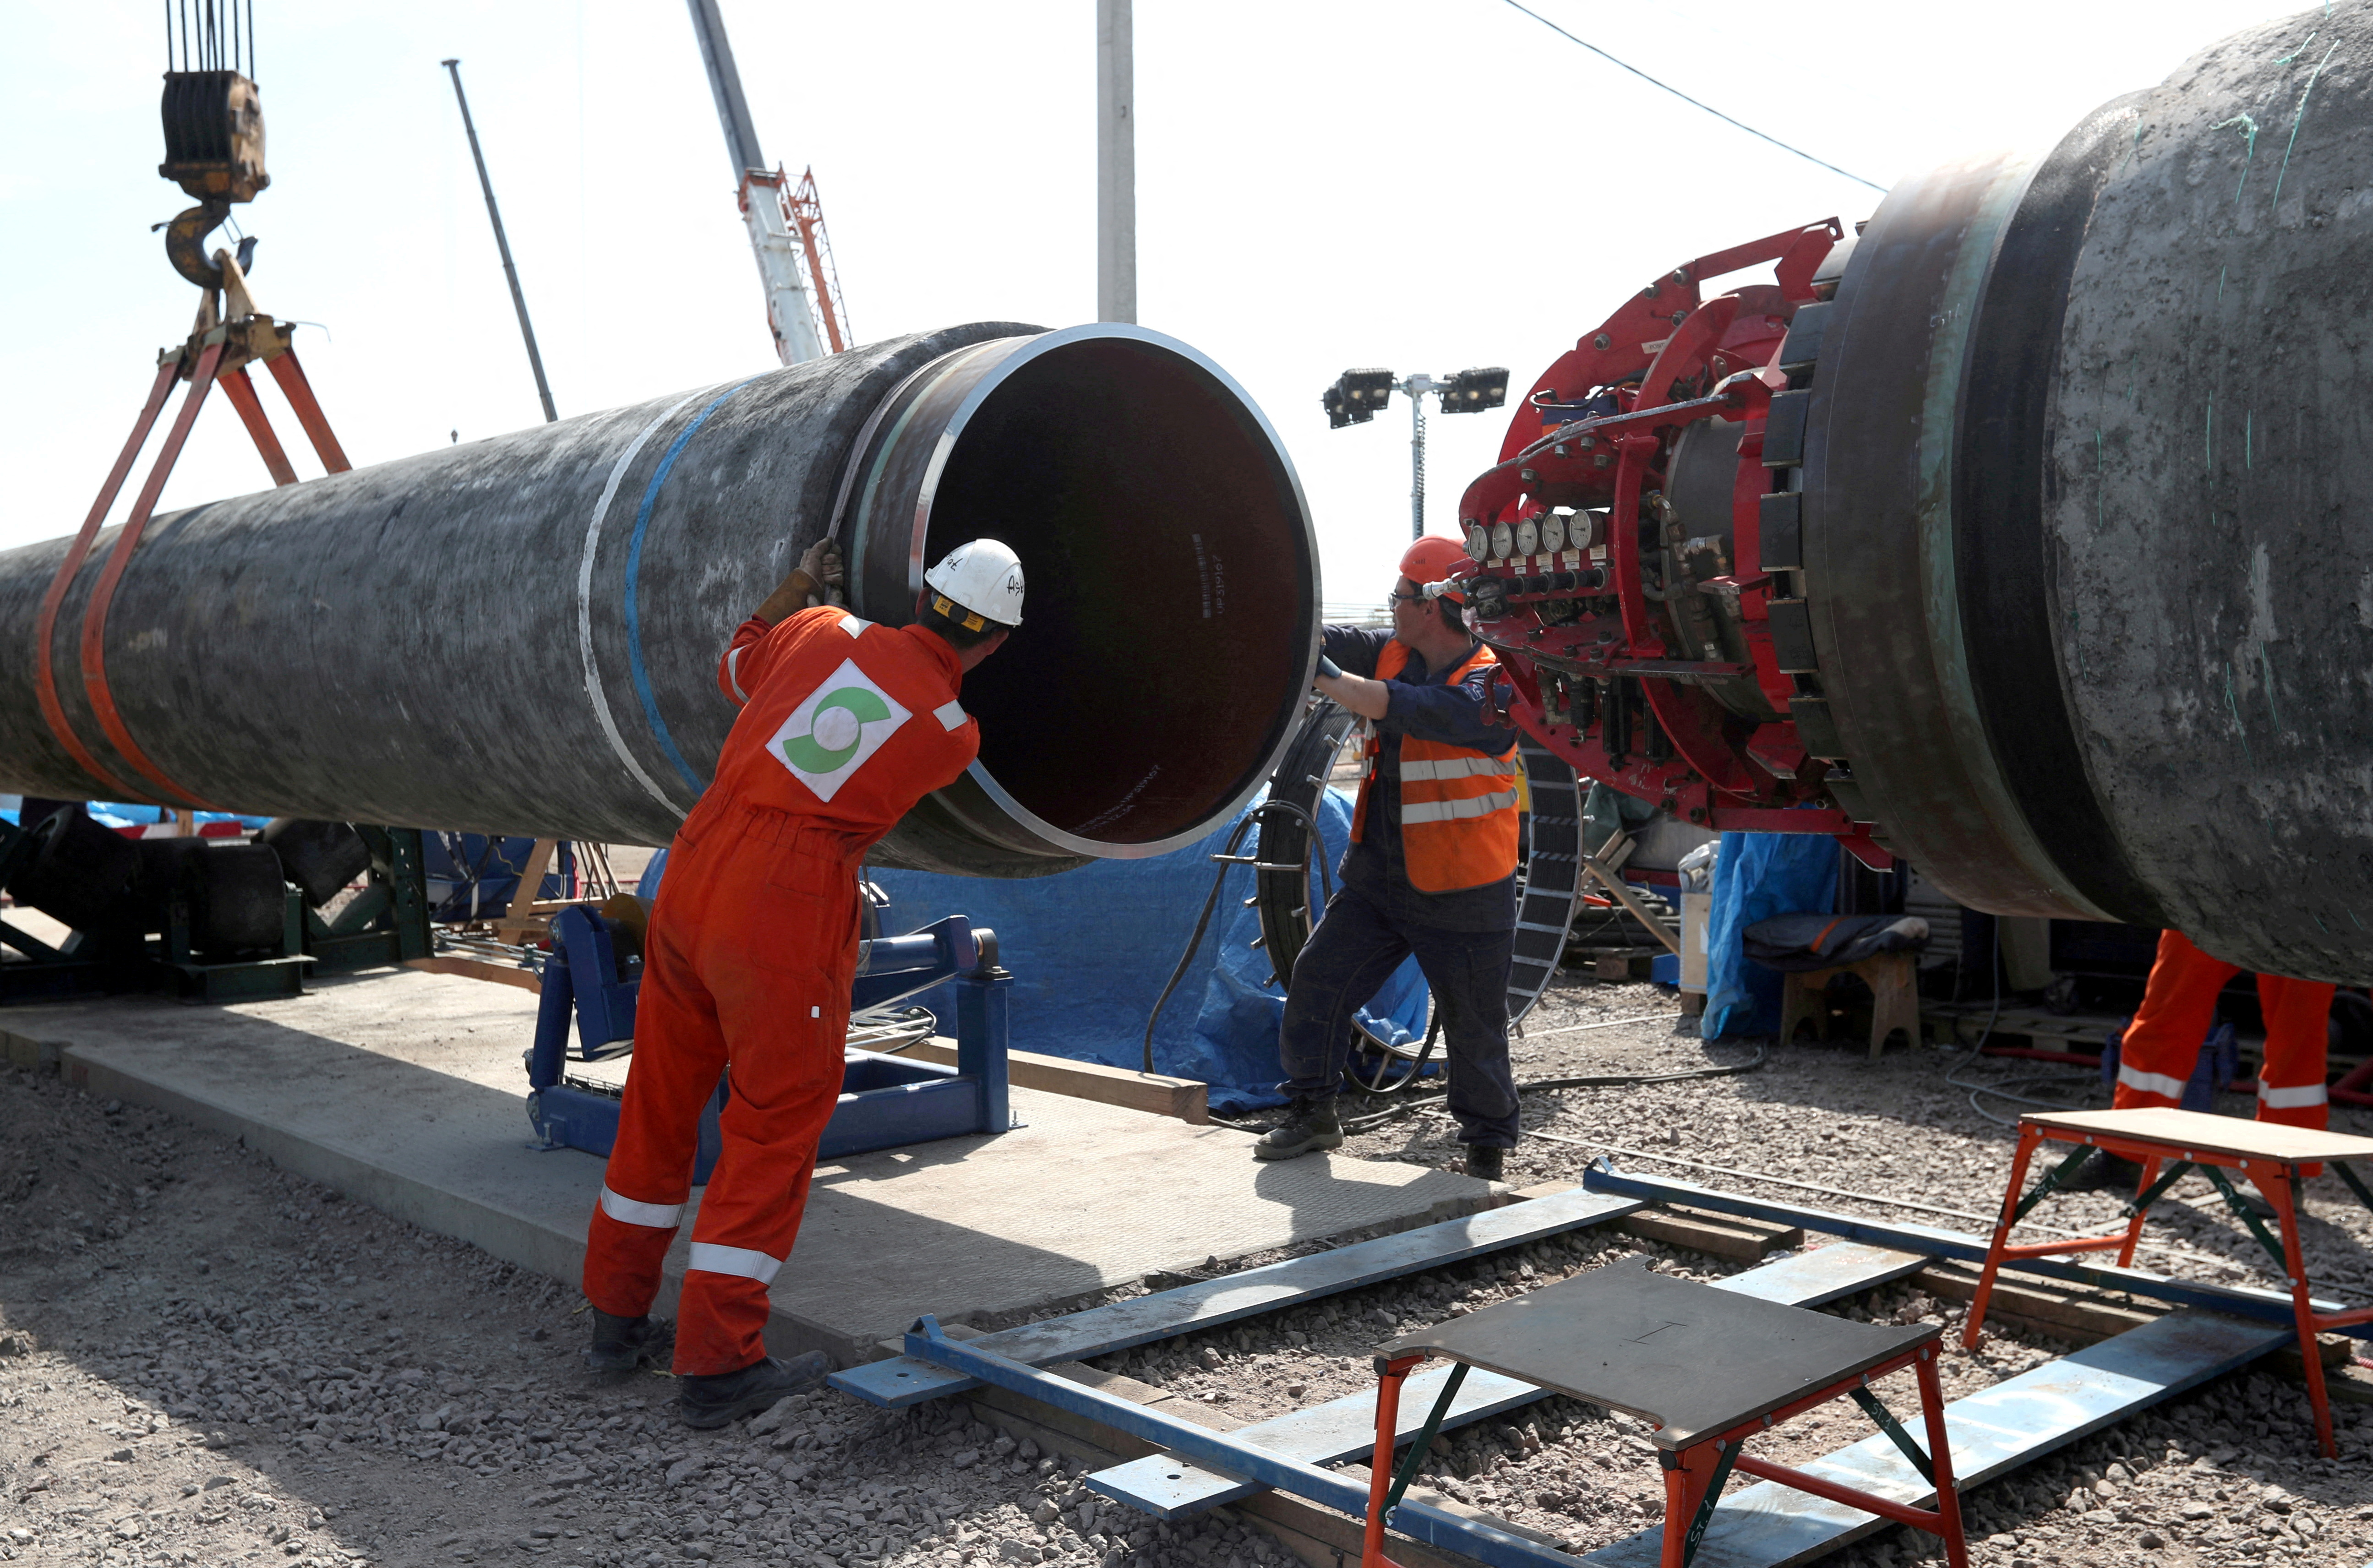 Workers are seen at the construction site of the Nord Stream 2 gas pipeline, near the town of Kingisepp, Leningrad region, Russia, June 5, 2019. REUTERS/Anton Vaganov/File Photo